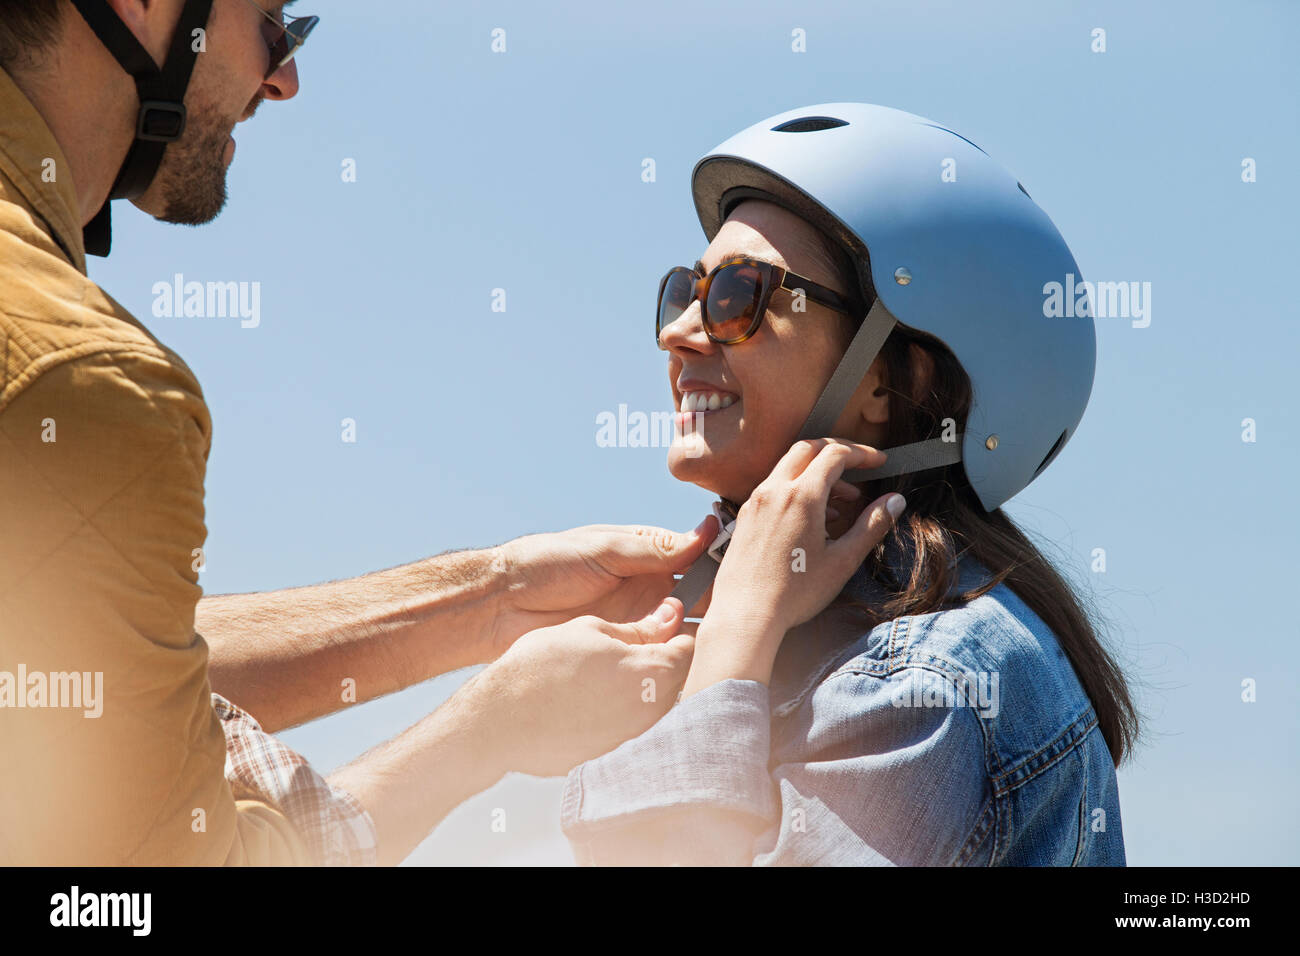 Man assisting woman in wearing bicycle helmet against clear sky on sunny day Stock Photo